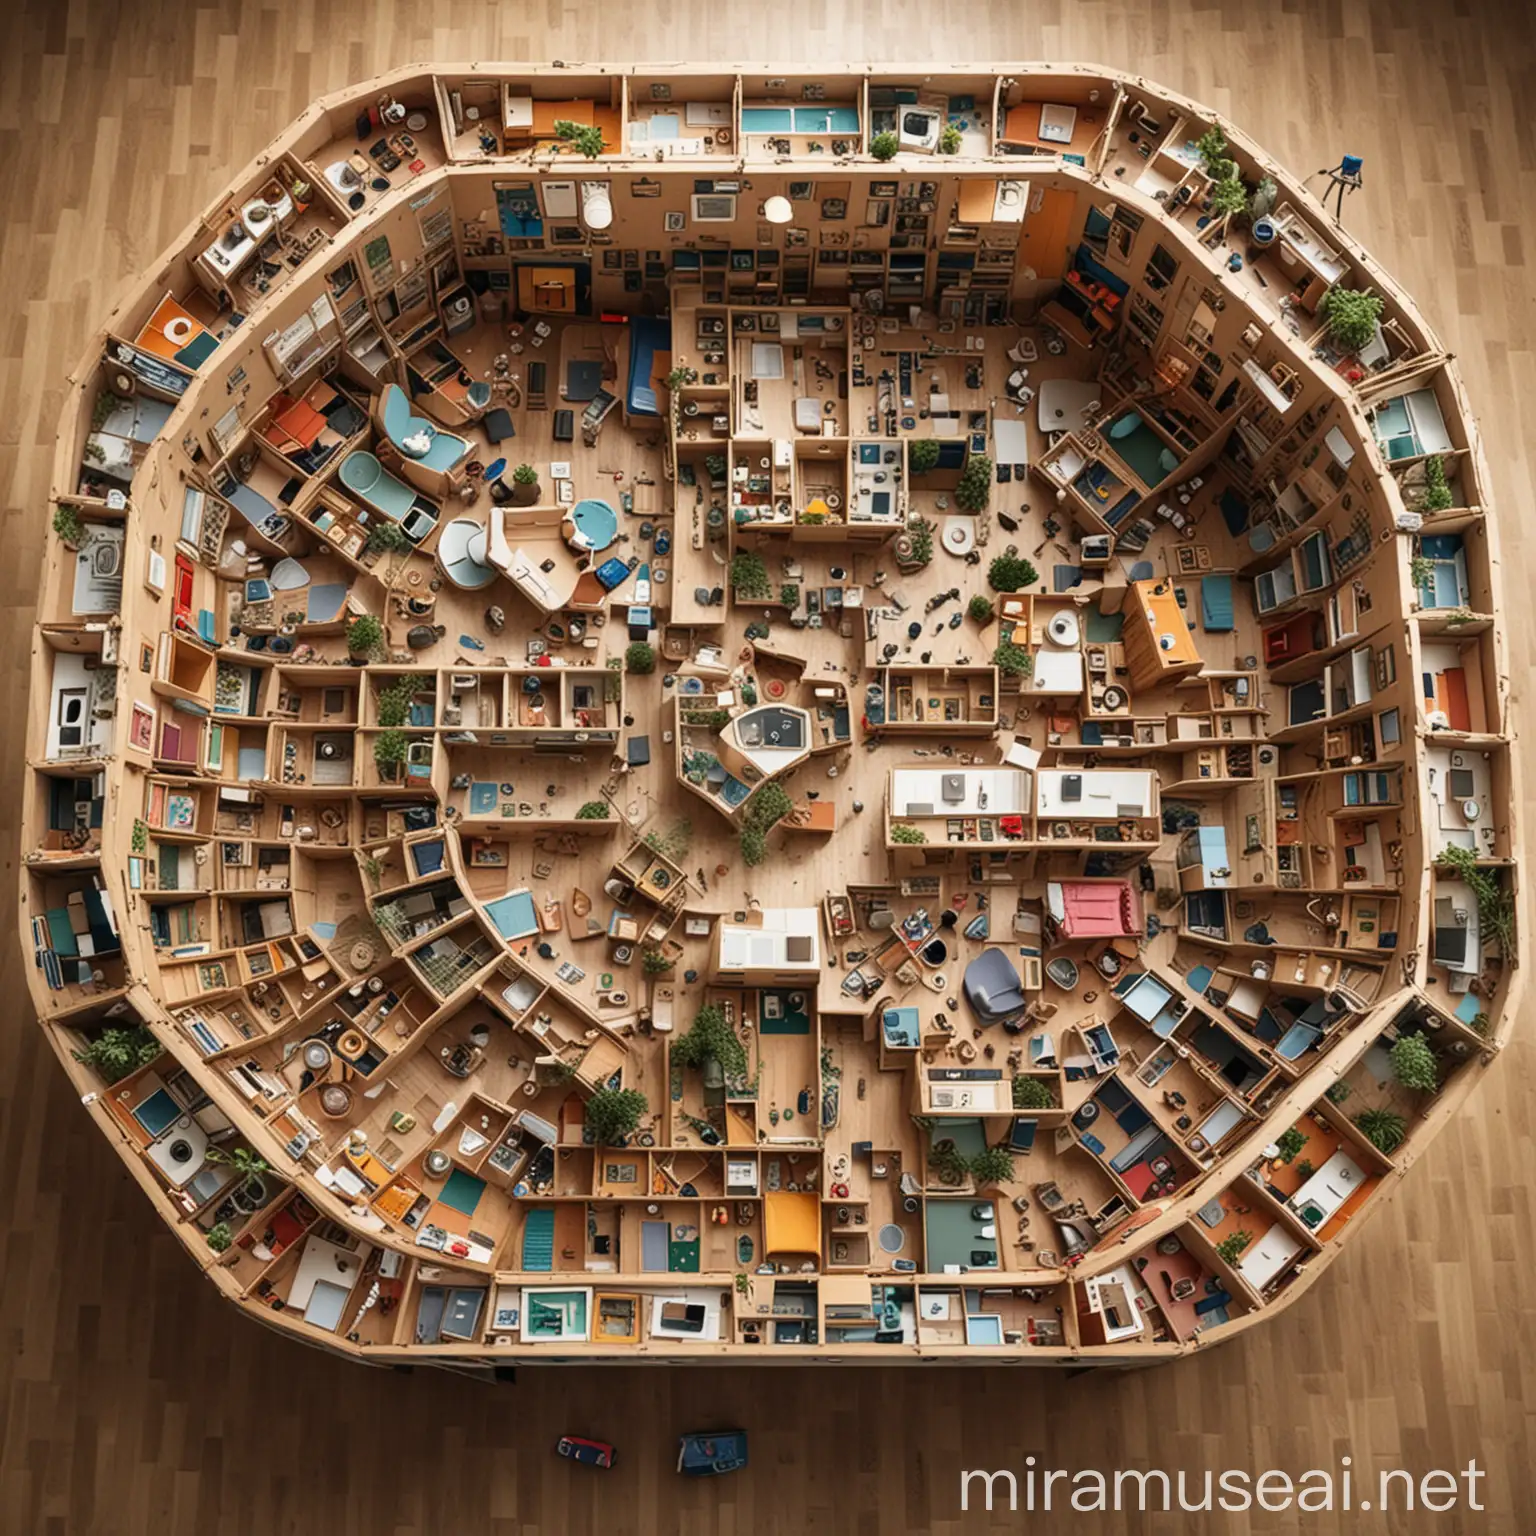 Birds Eye View of a Multithematic Room